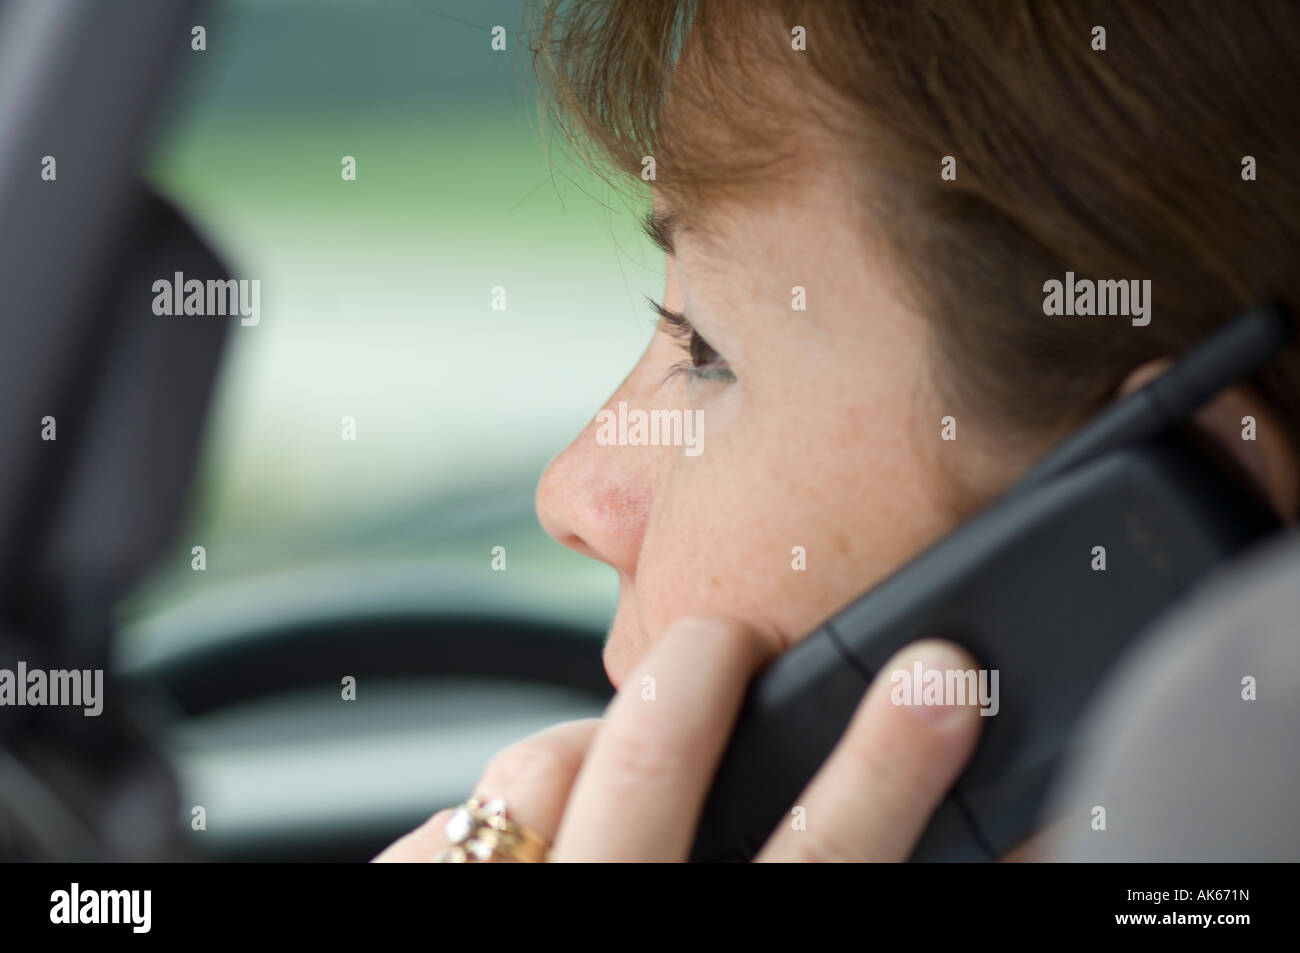 Young Woman talking on cell phone in car Banque D'Images